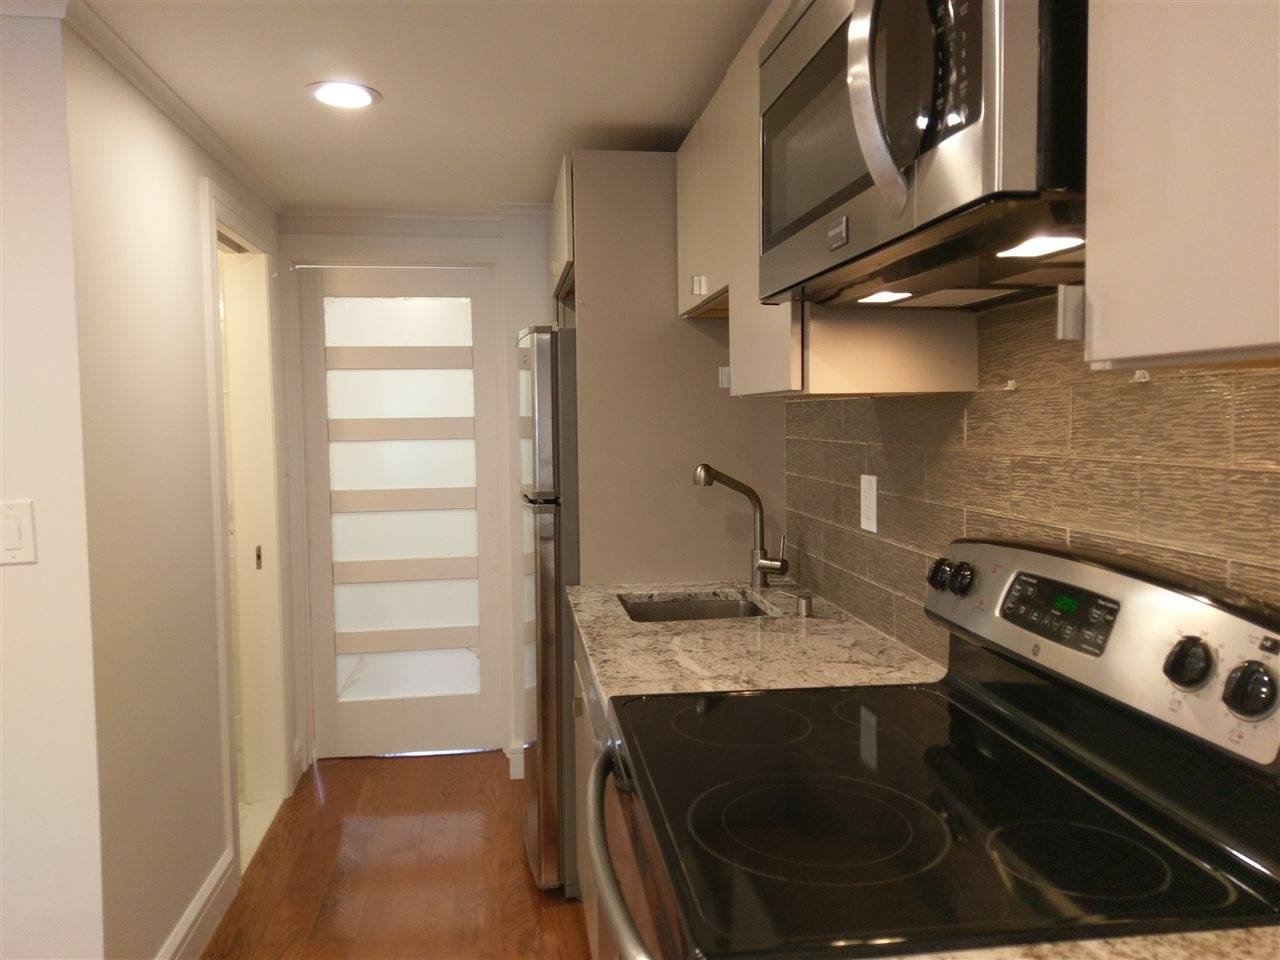 Meticulously renovated with high-end finishes - 1 BR Hoboken New Jersey